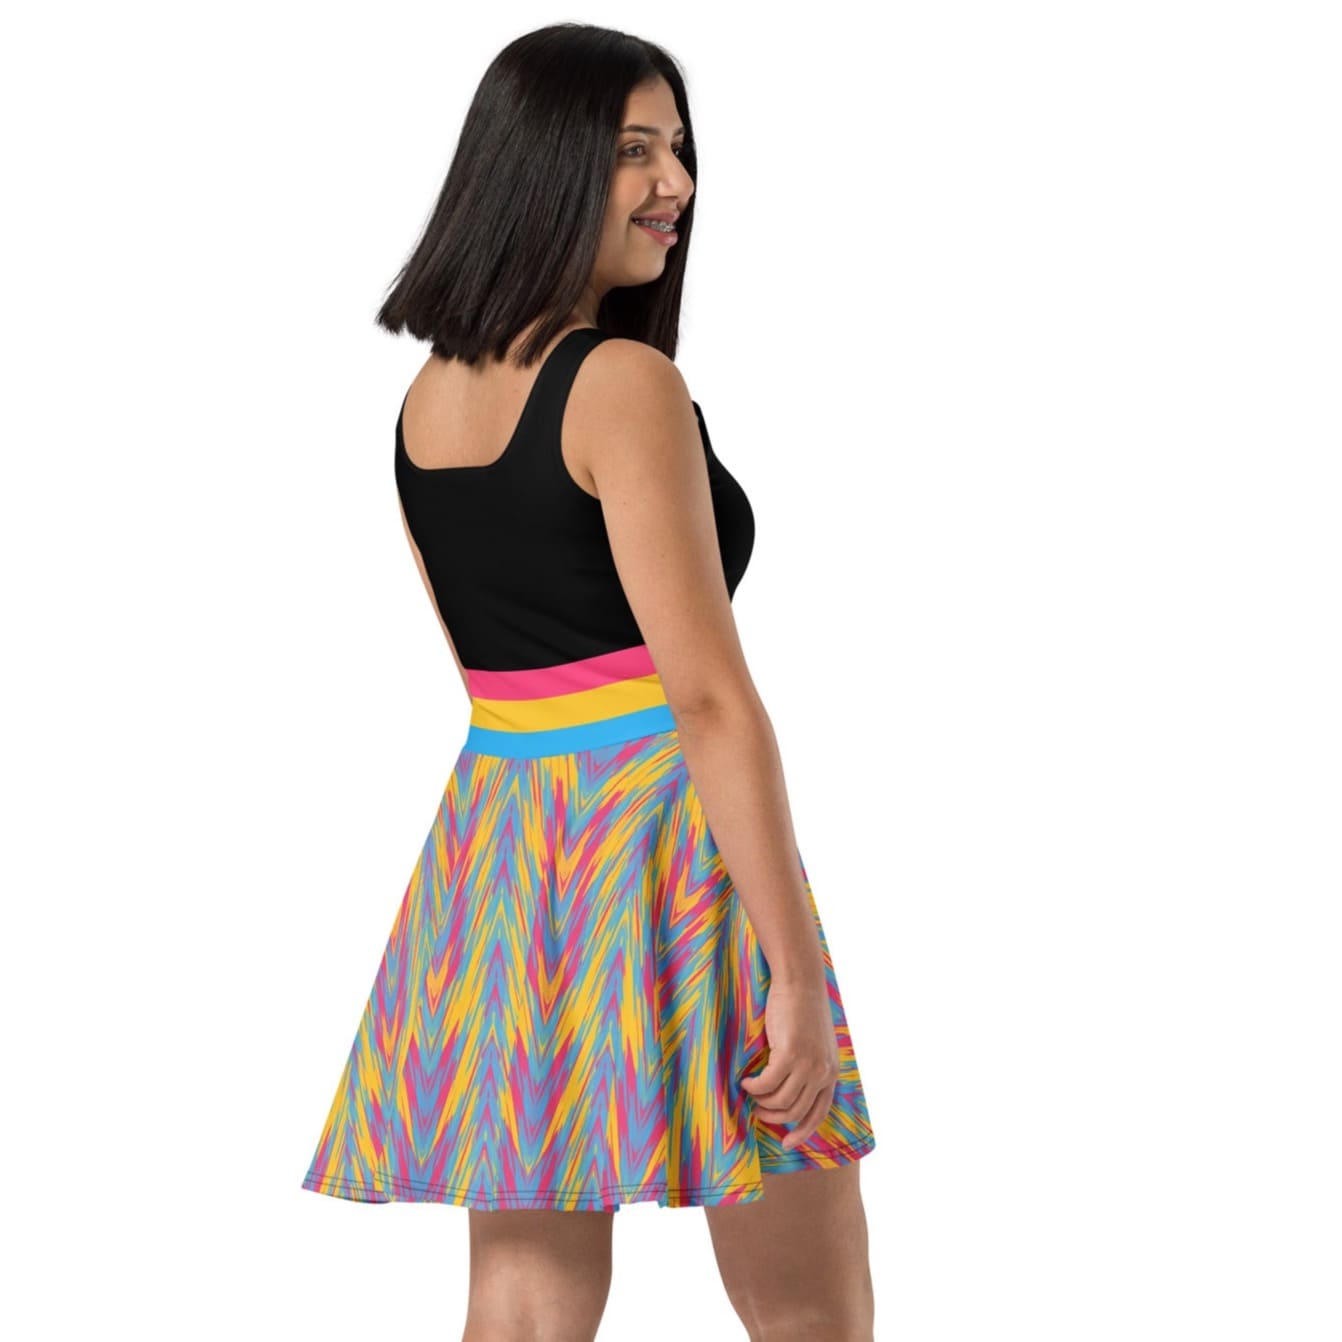 pansexual dress, subtle pan pride clothing, right